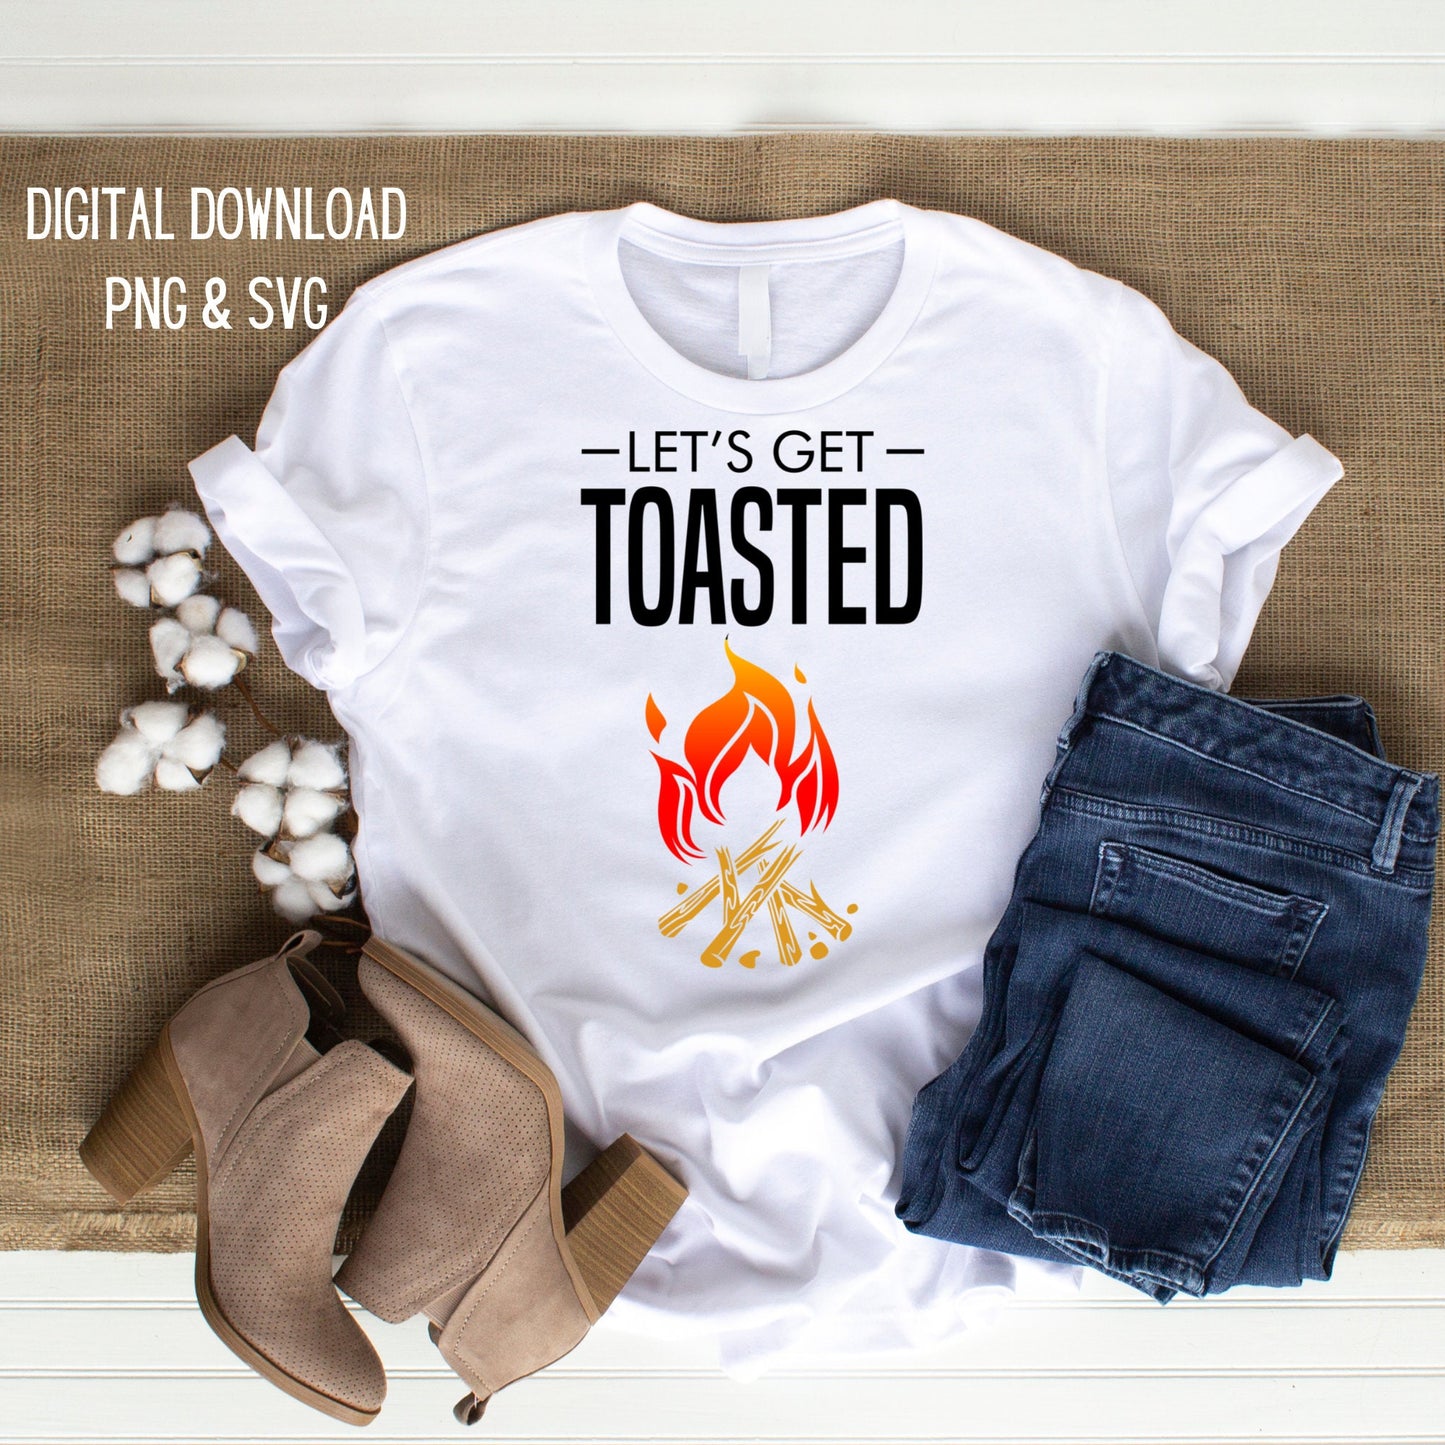 Let's get toasted